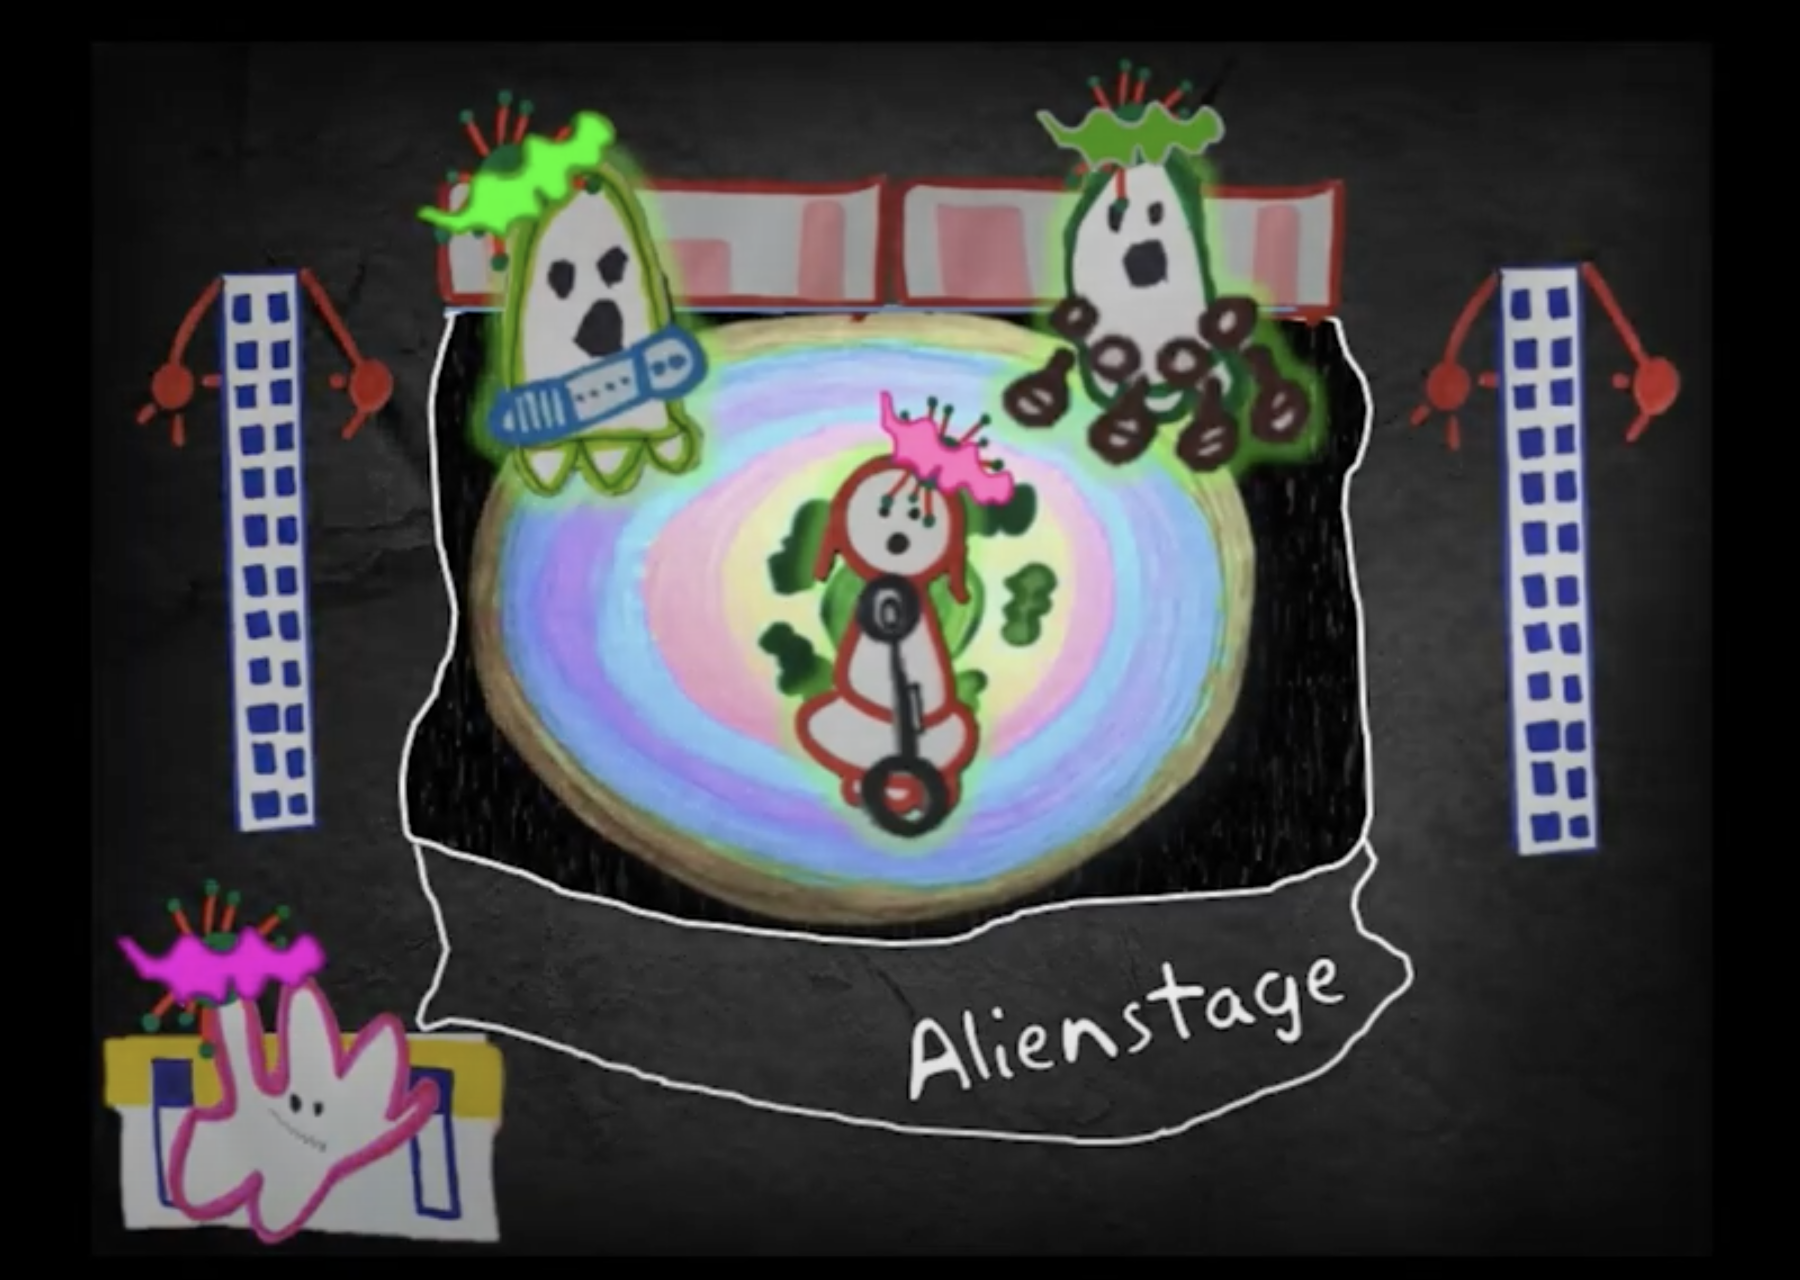 Three cartoon aliens are performing a rock concert on a colourful, pastel stage labelled Alienstage. Each alien has spikey hair which is pink or green. One alien shaped like a pink slime is playing the keyboard on the side.